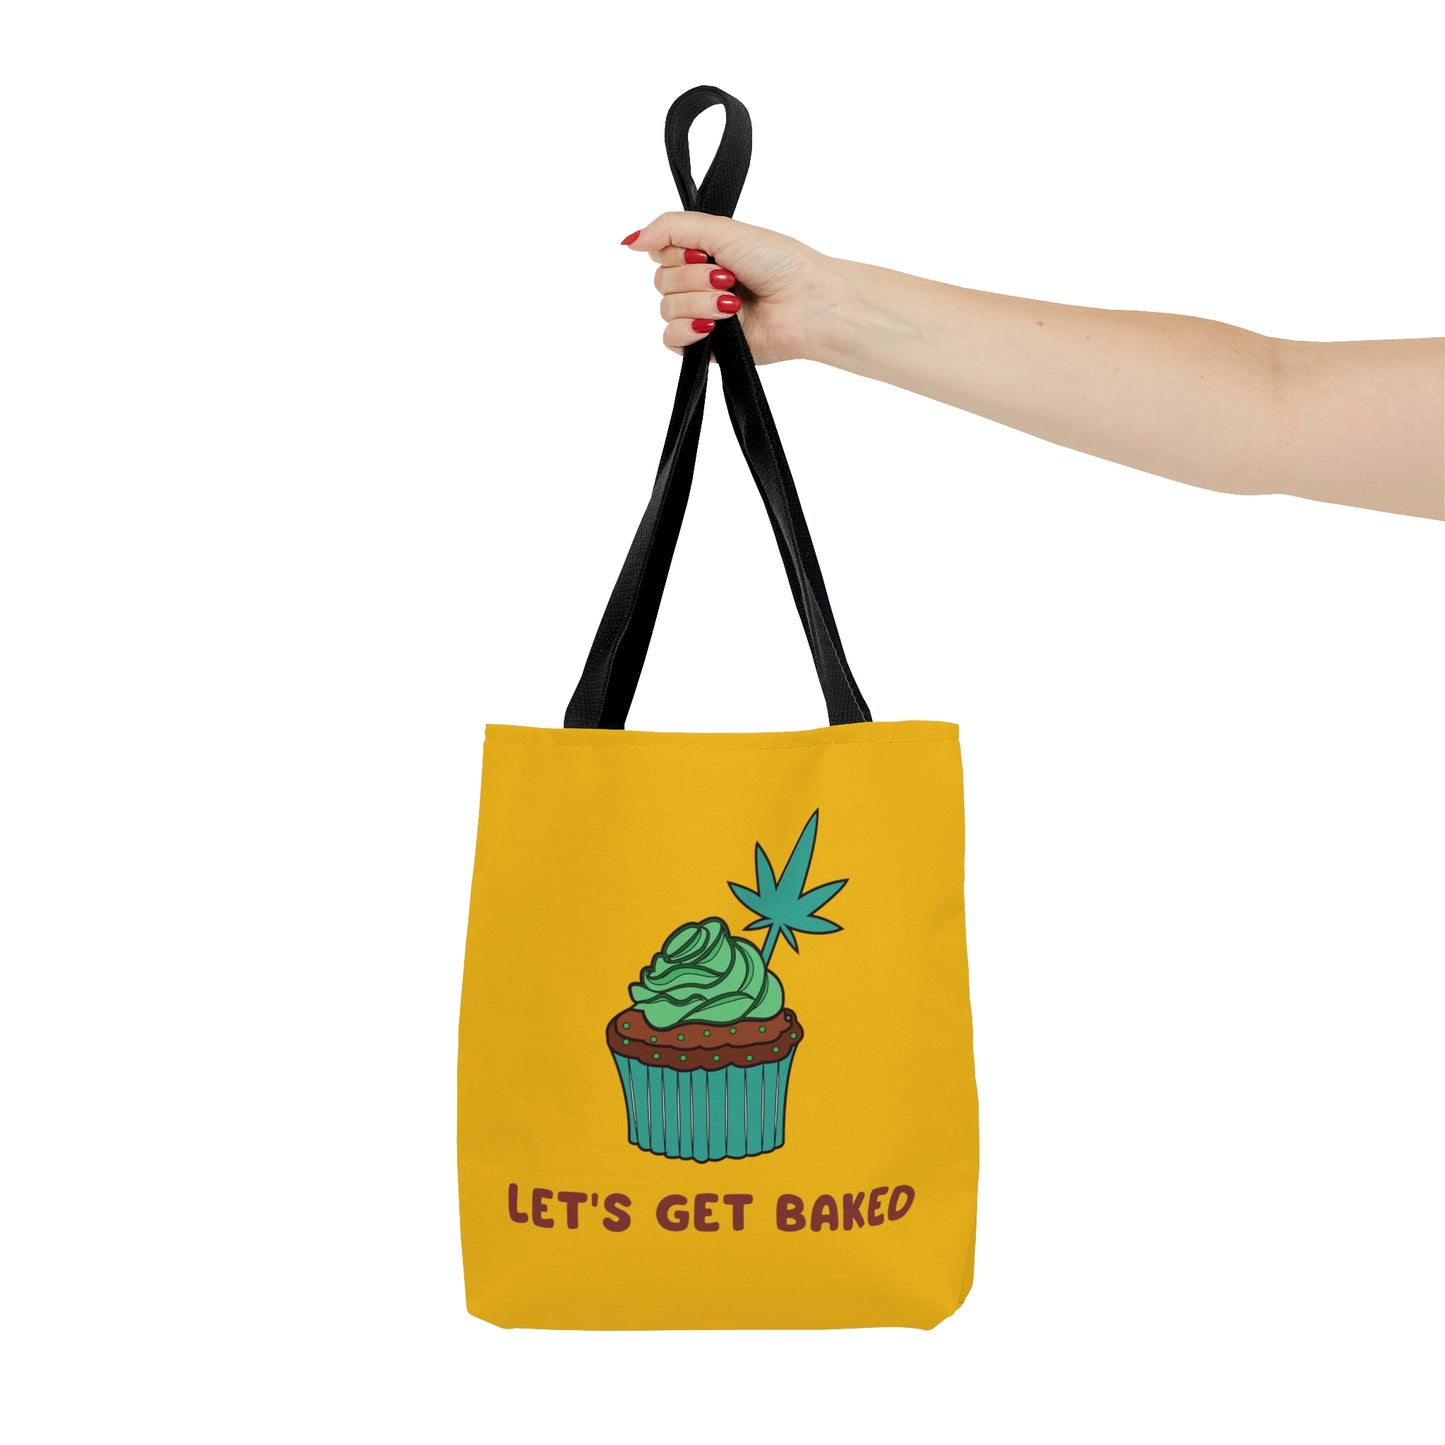 A trendy Let's Get Baked Yellow Cannabis Tote Bag with nice graphic of a weed cupcake with cannabis leaf